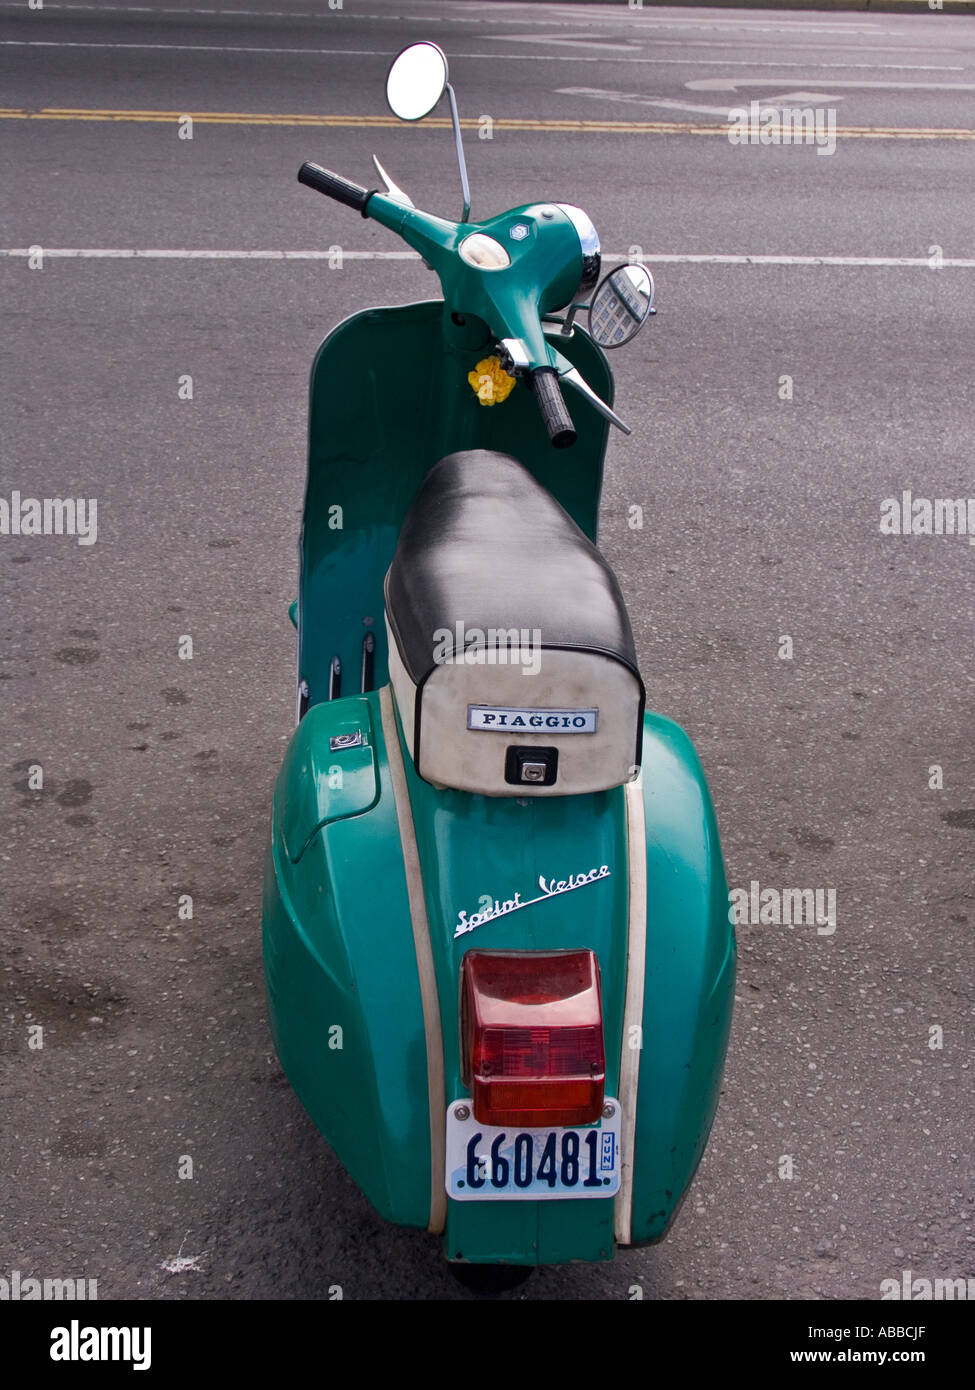 Vespa Sprint Veloce mad by Piaggio Motorworks Italy parked on street in  Victoria British Columbia Stock Photo - Alamy